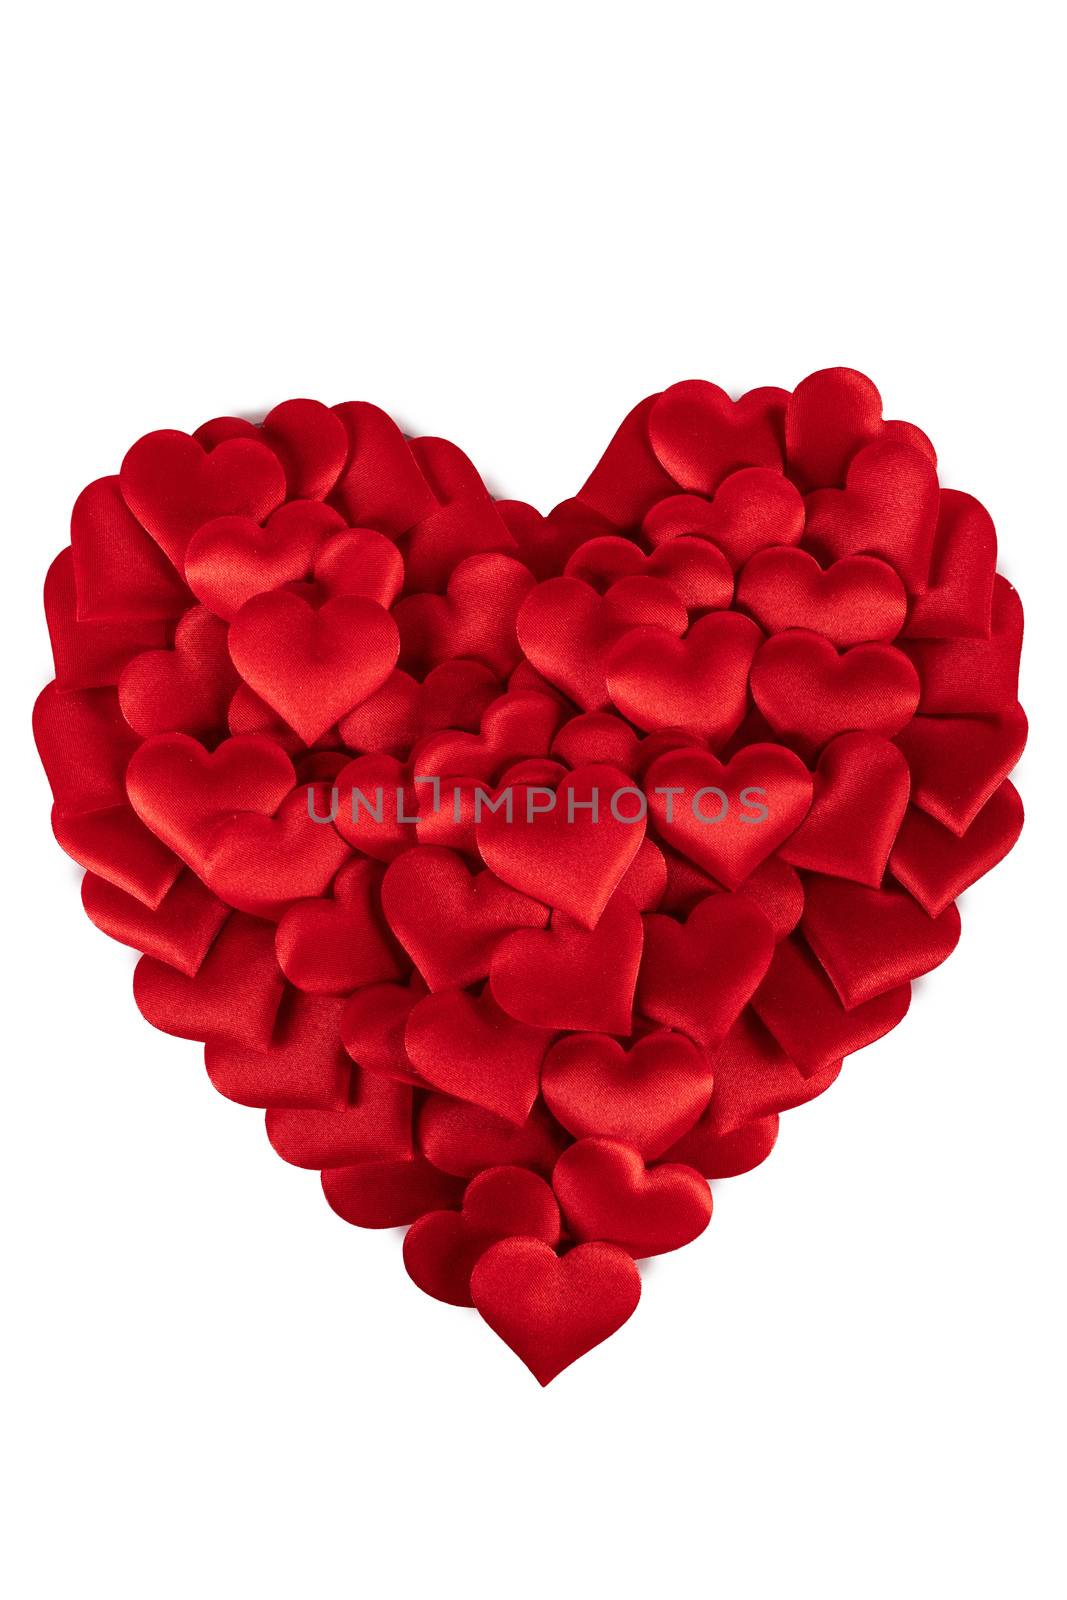 Valentine's day many red silk hearts isolated on white background, love concept